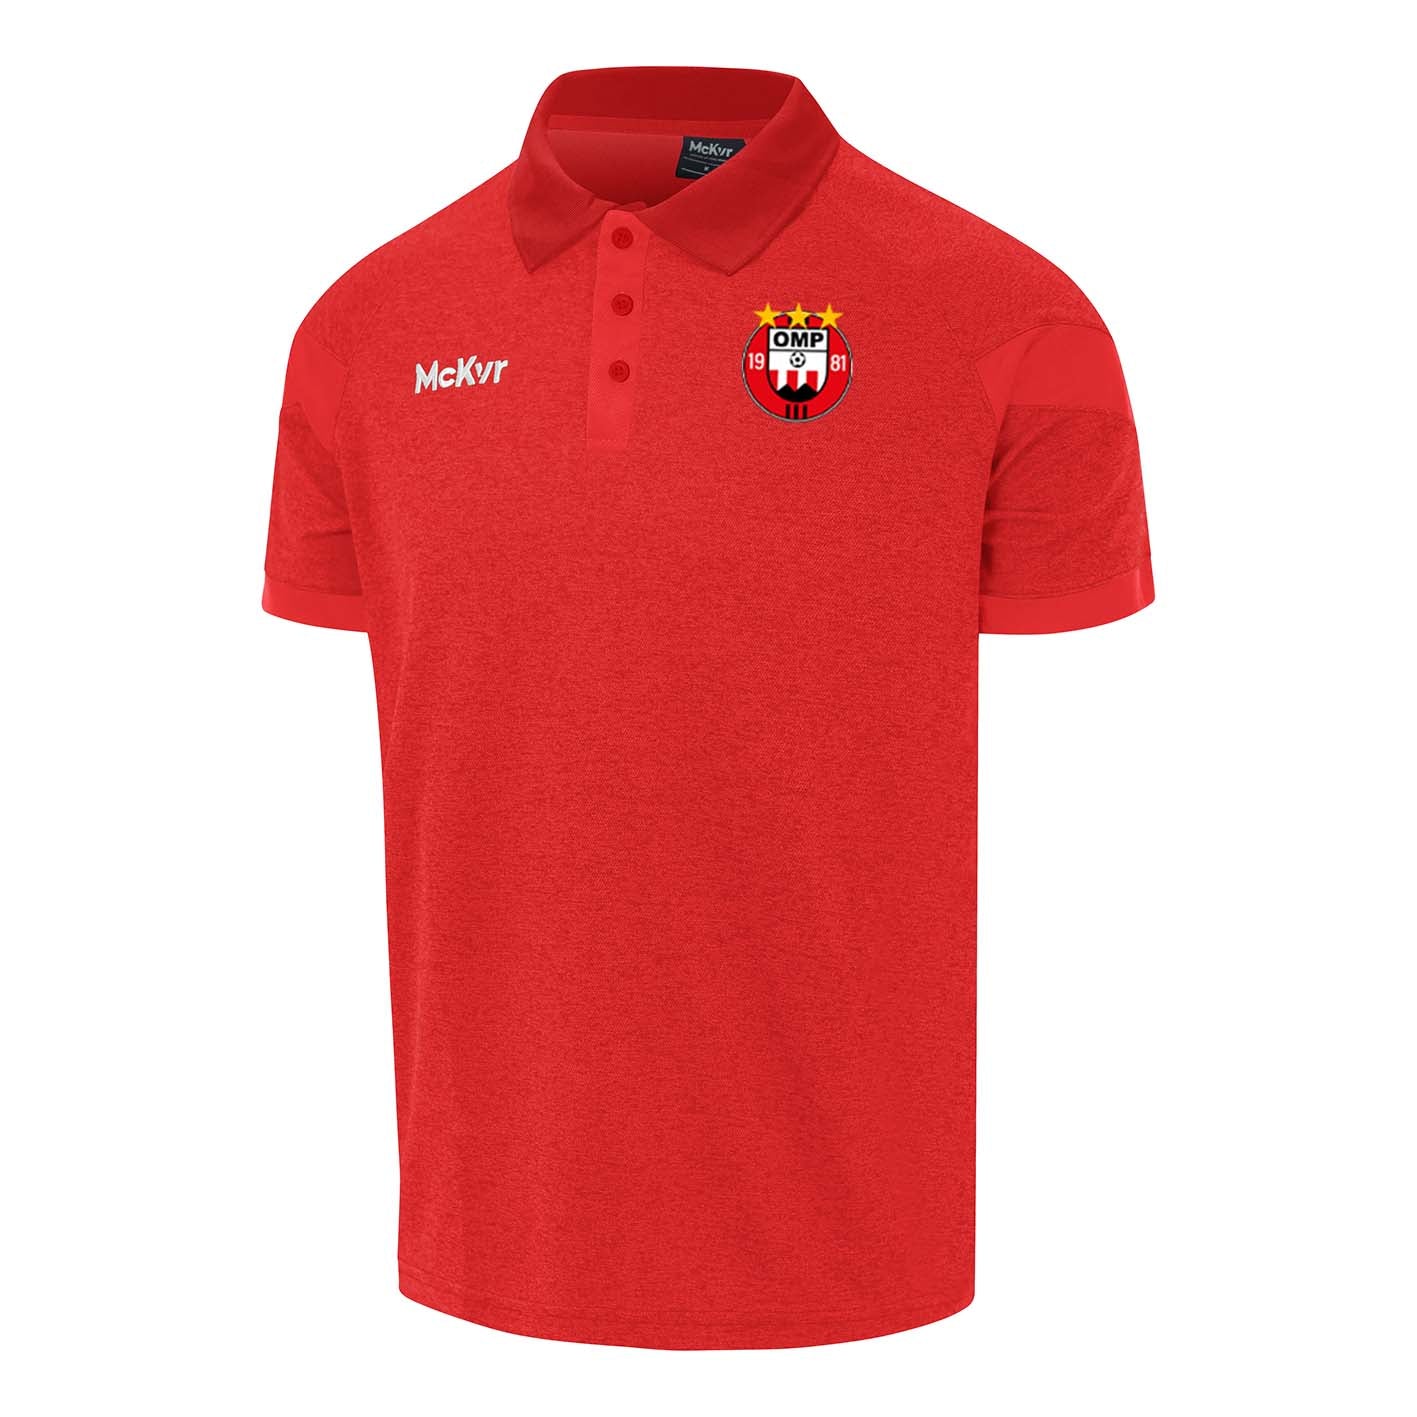 Mc Keever OMP United Core 22 Polo Top - Adult - Red